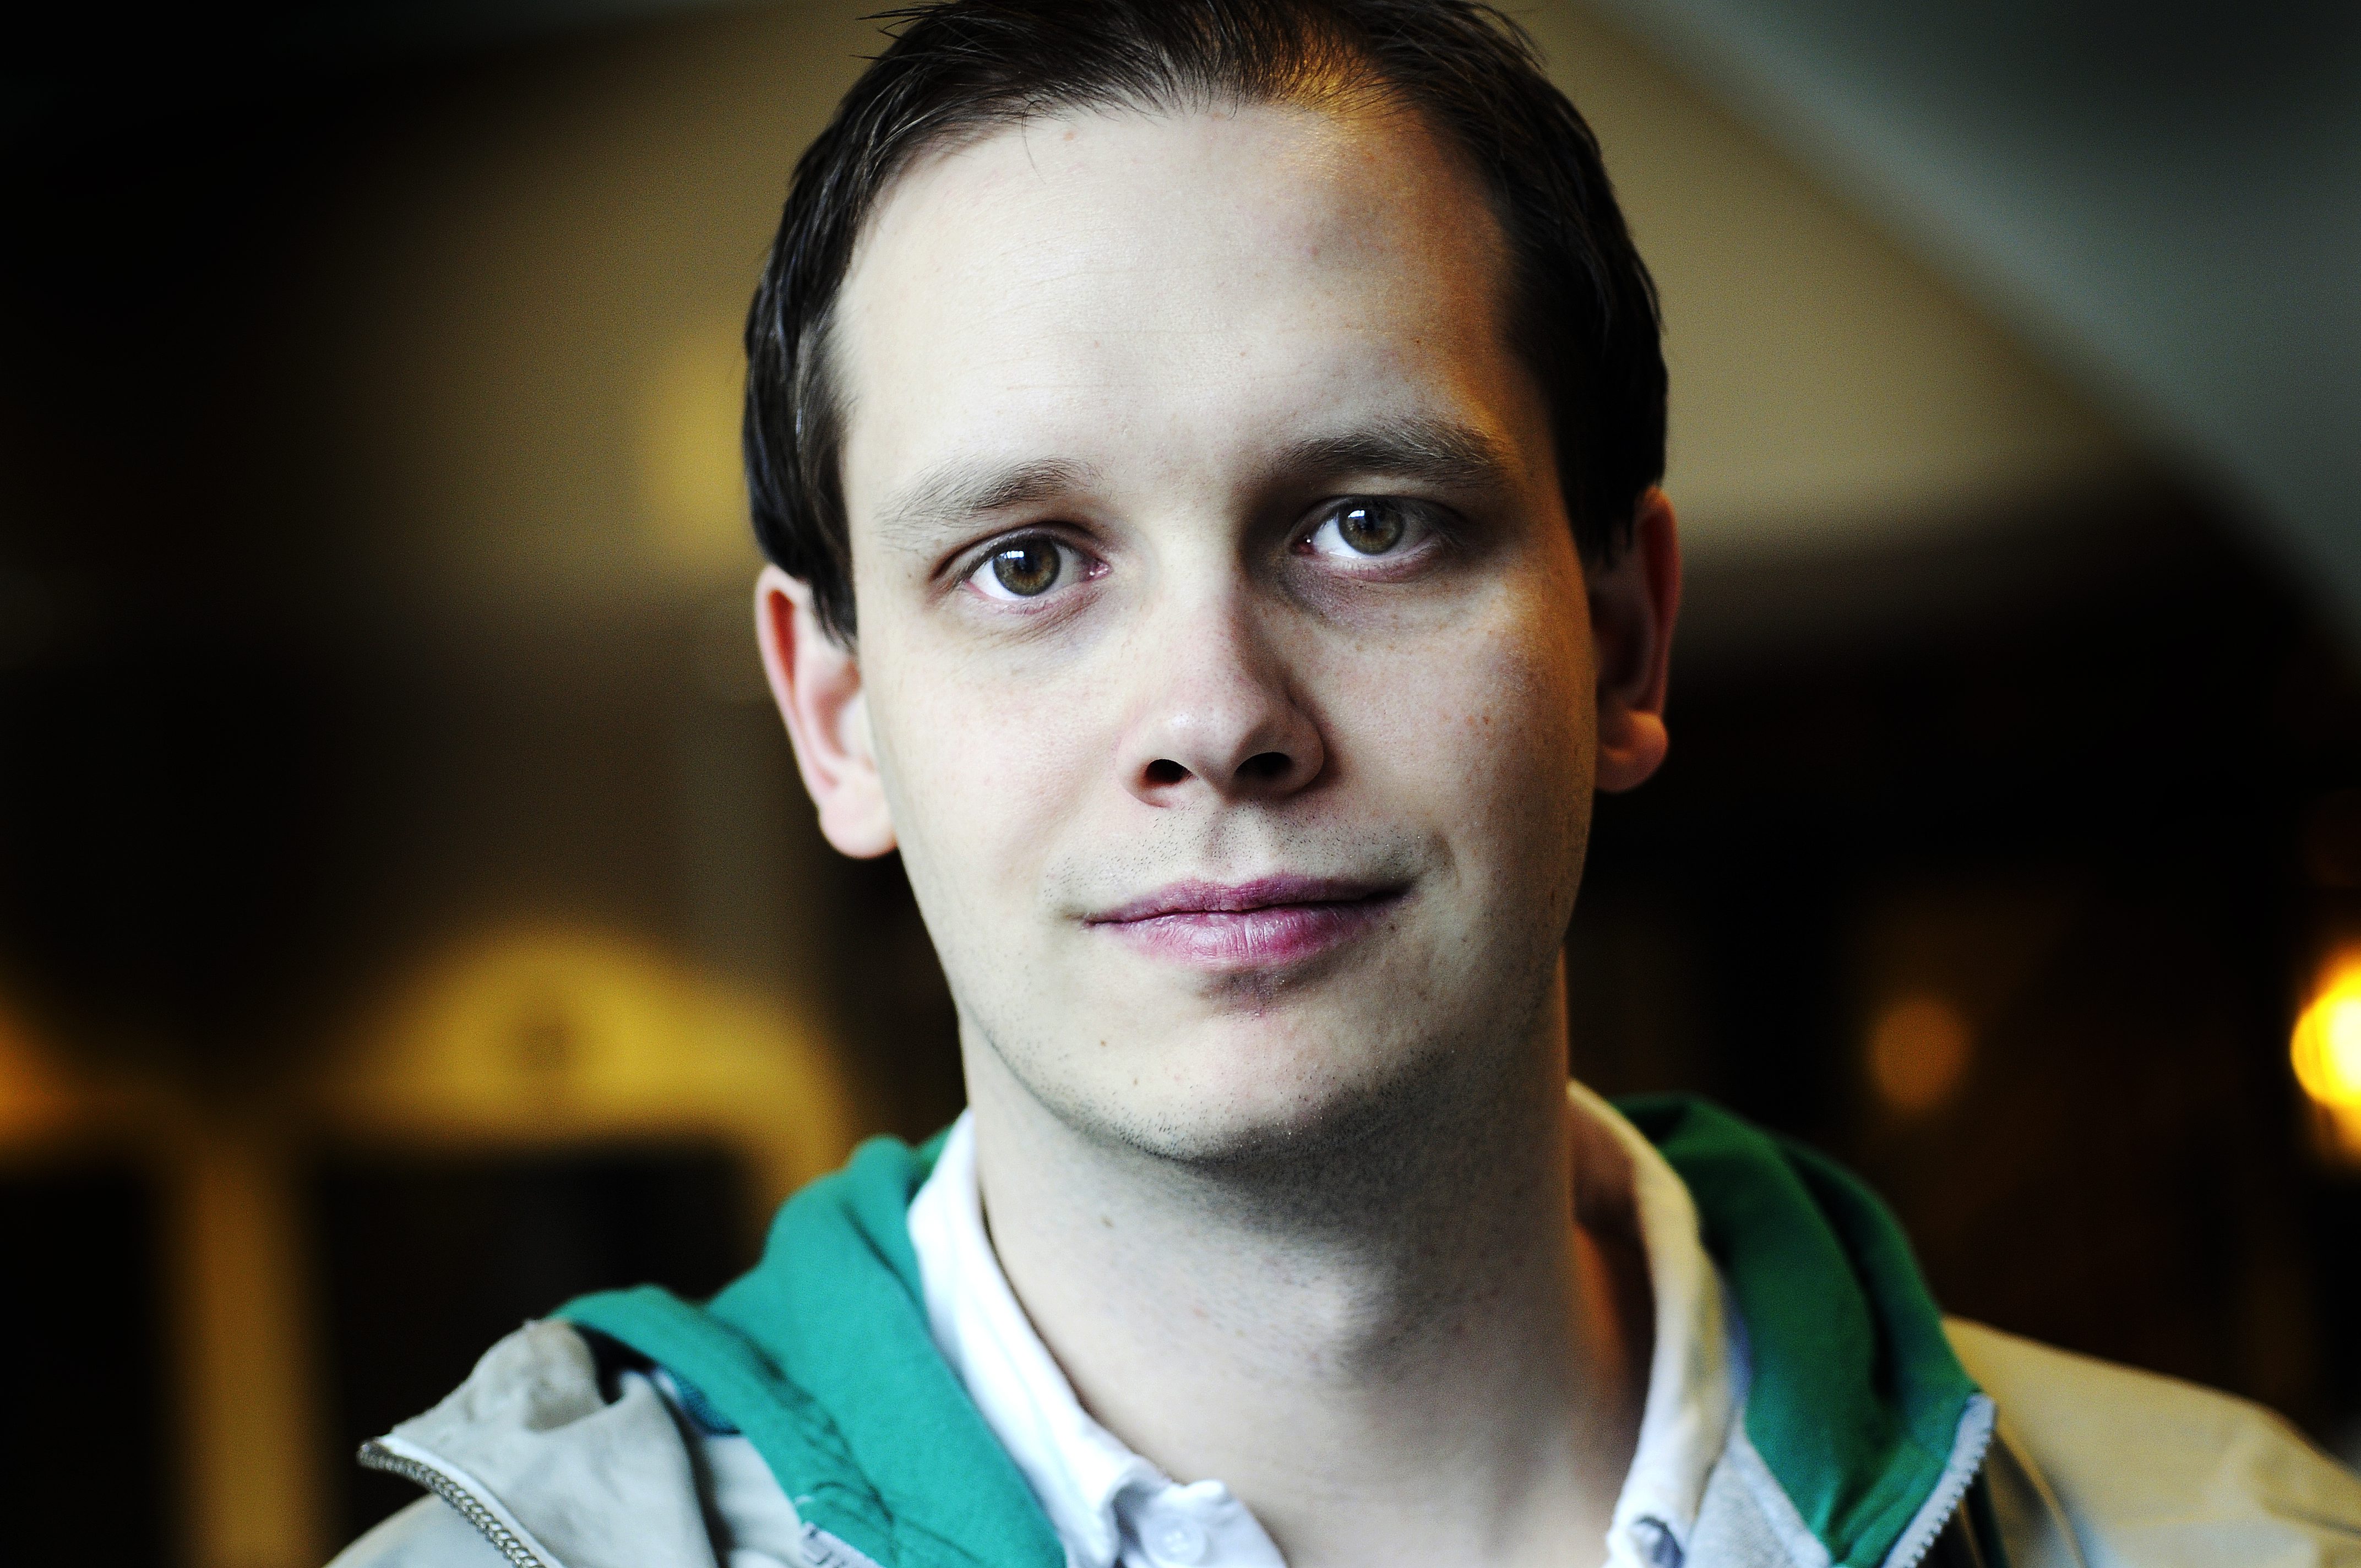 The Pirate Bay, Peter Sunde, Fildelning